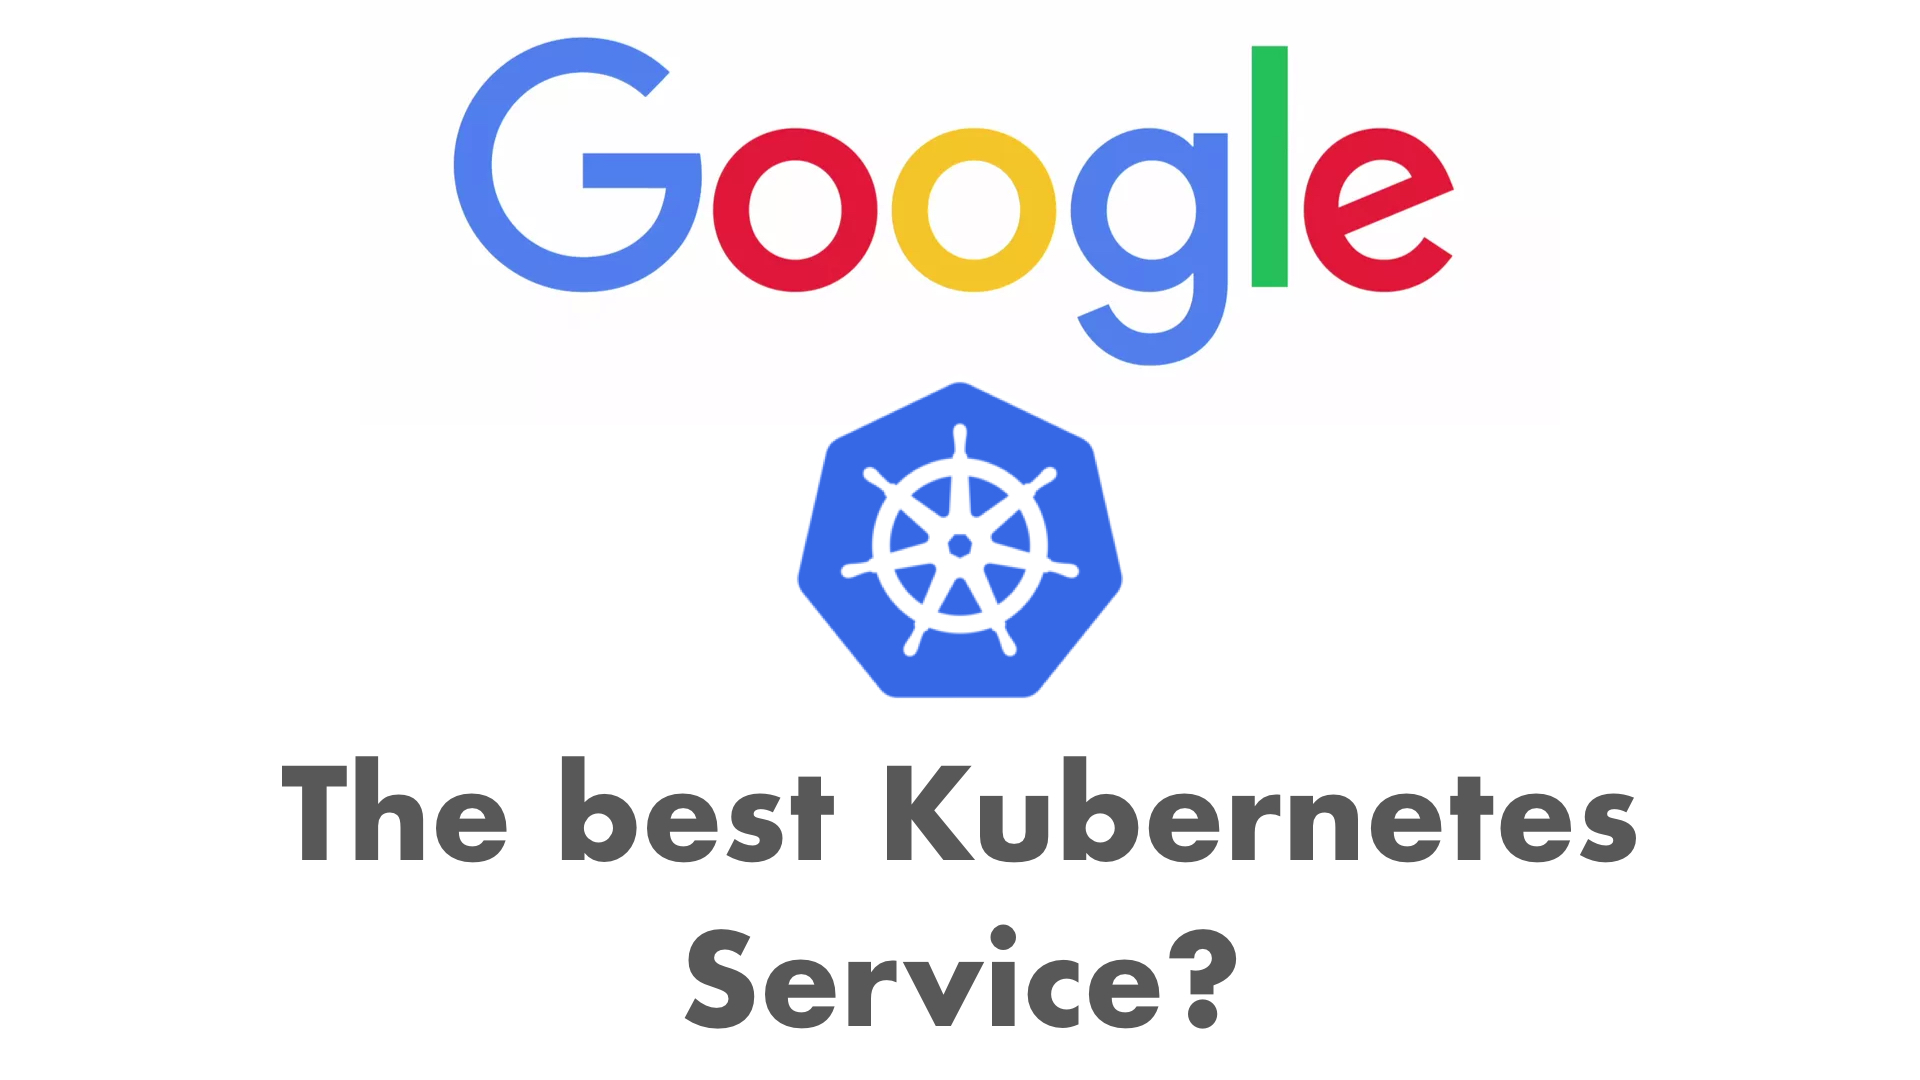 Why GKE is probably the best Kubernetes service available